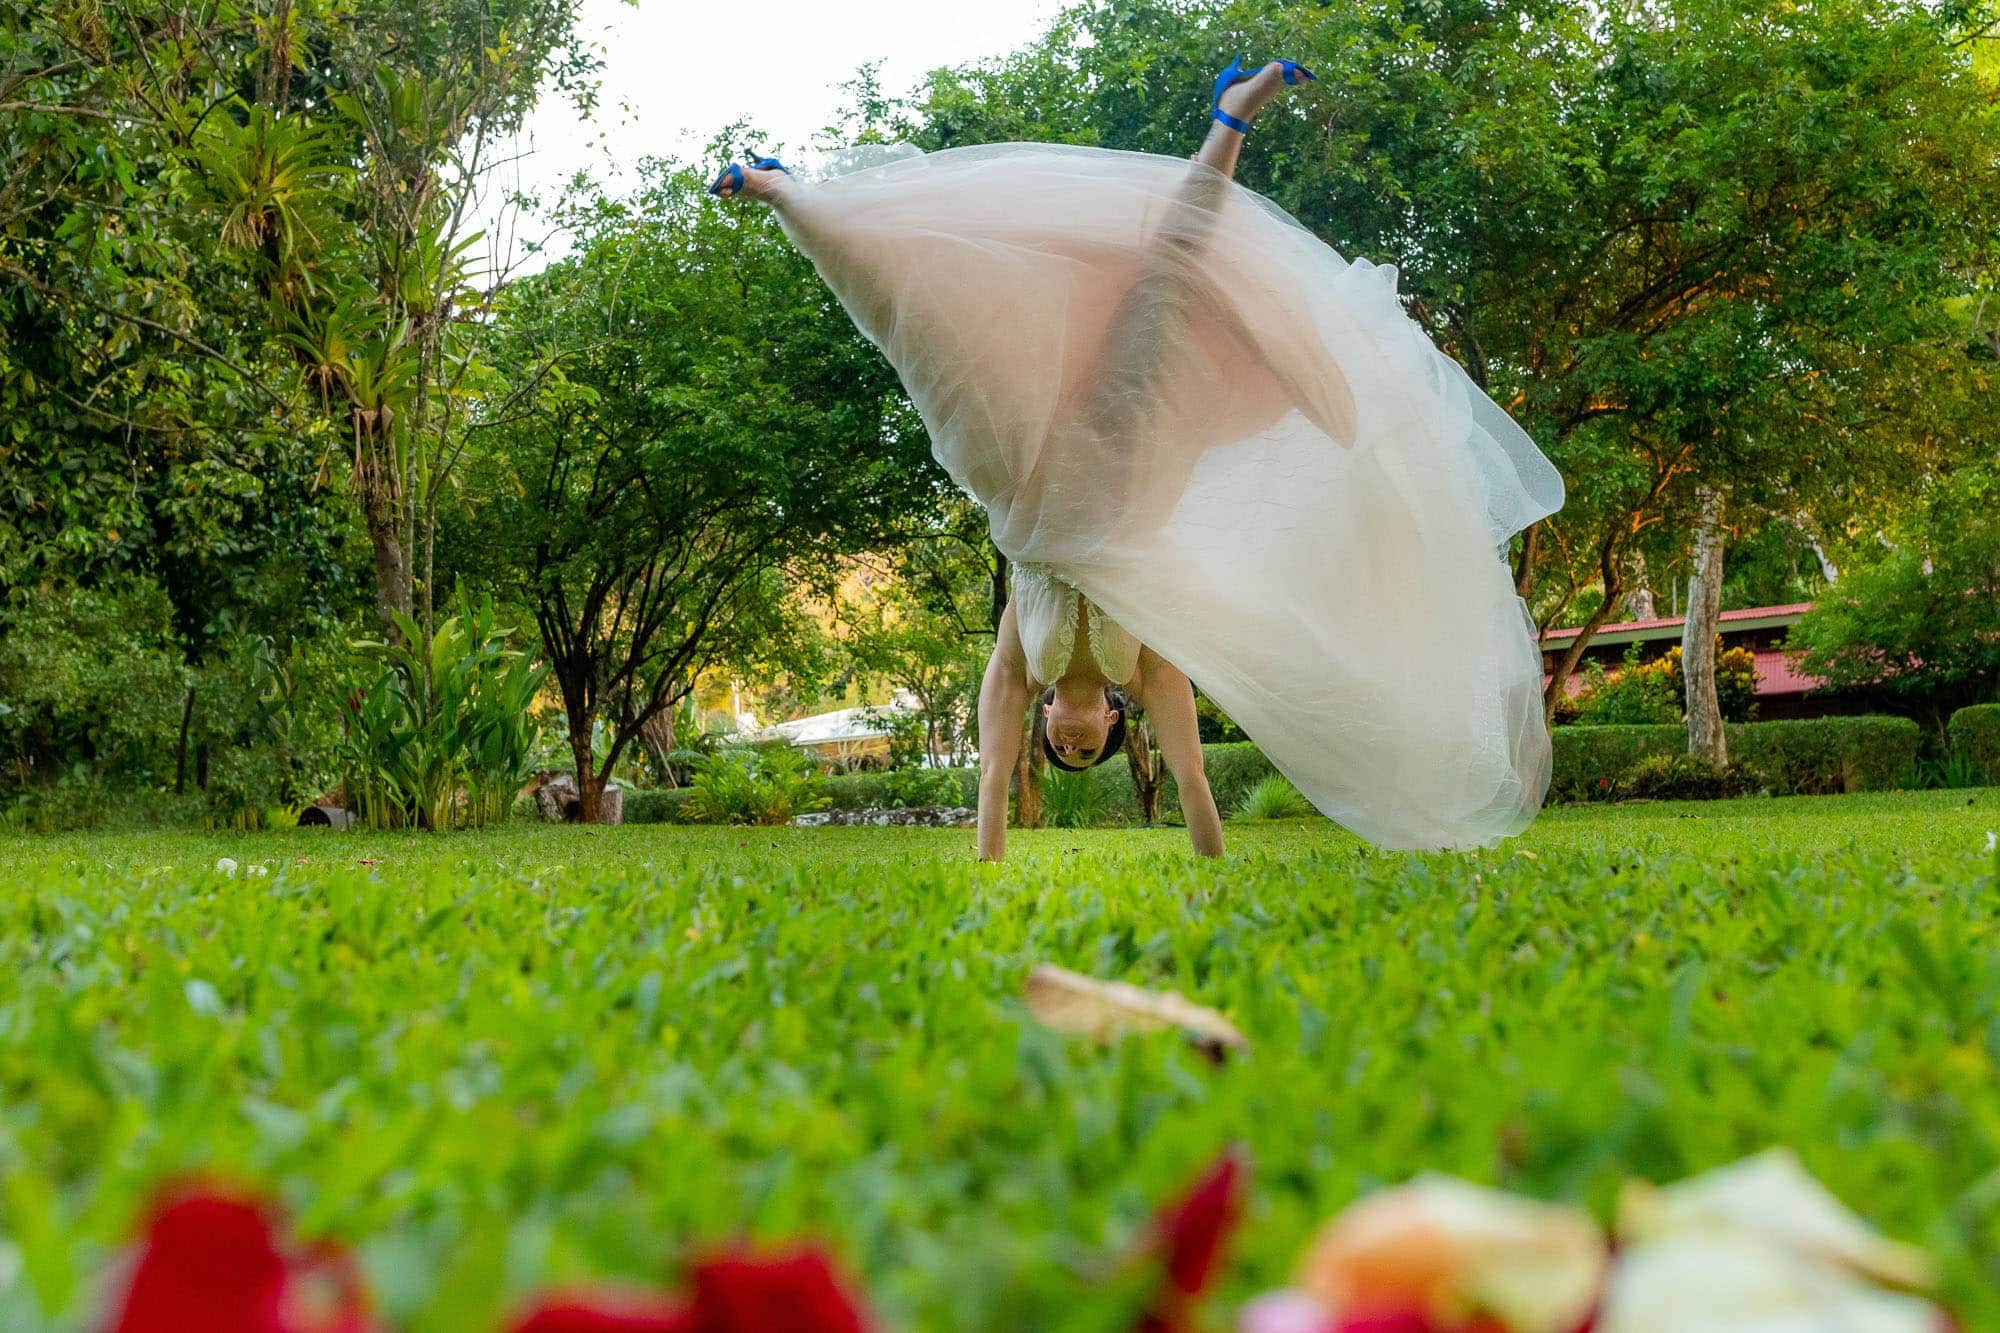 The bride performing a cartwheel in her dress!